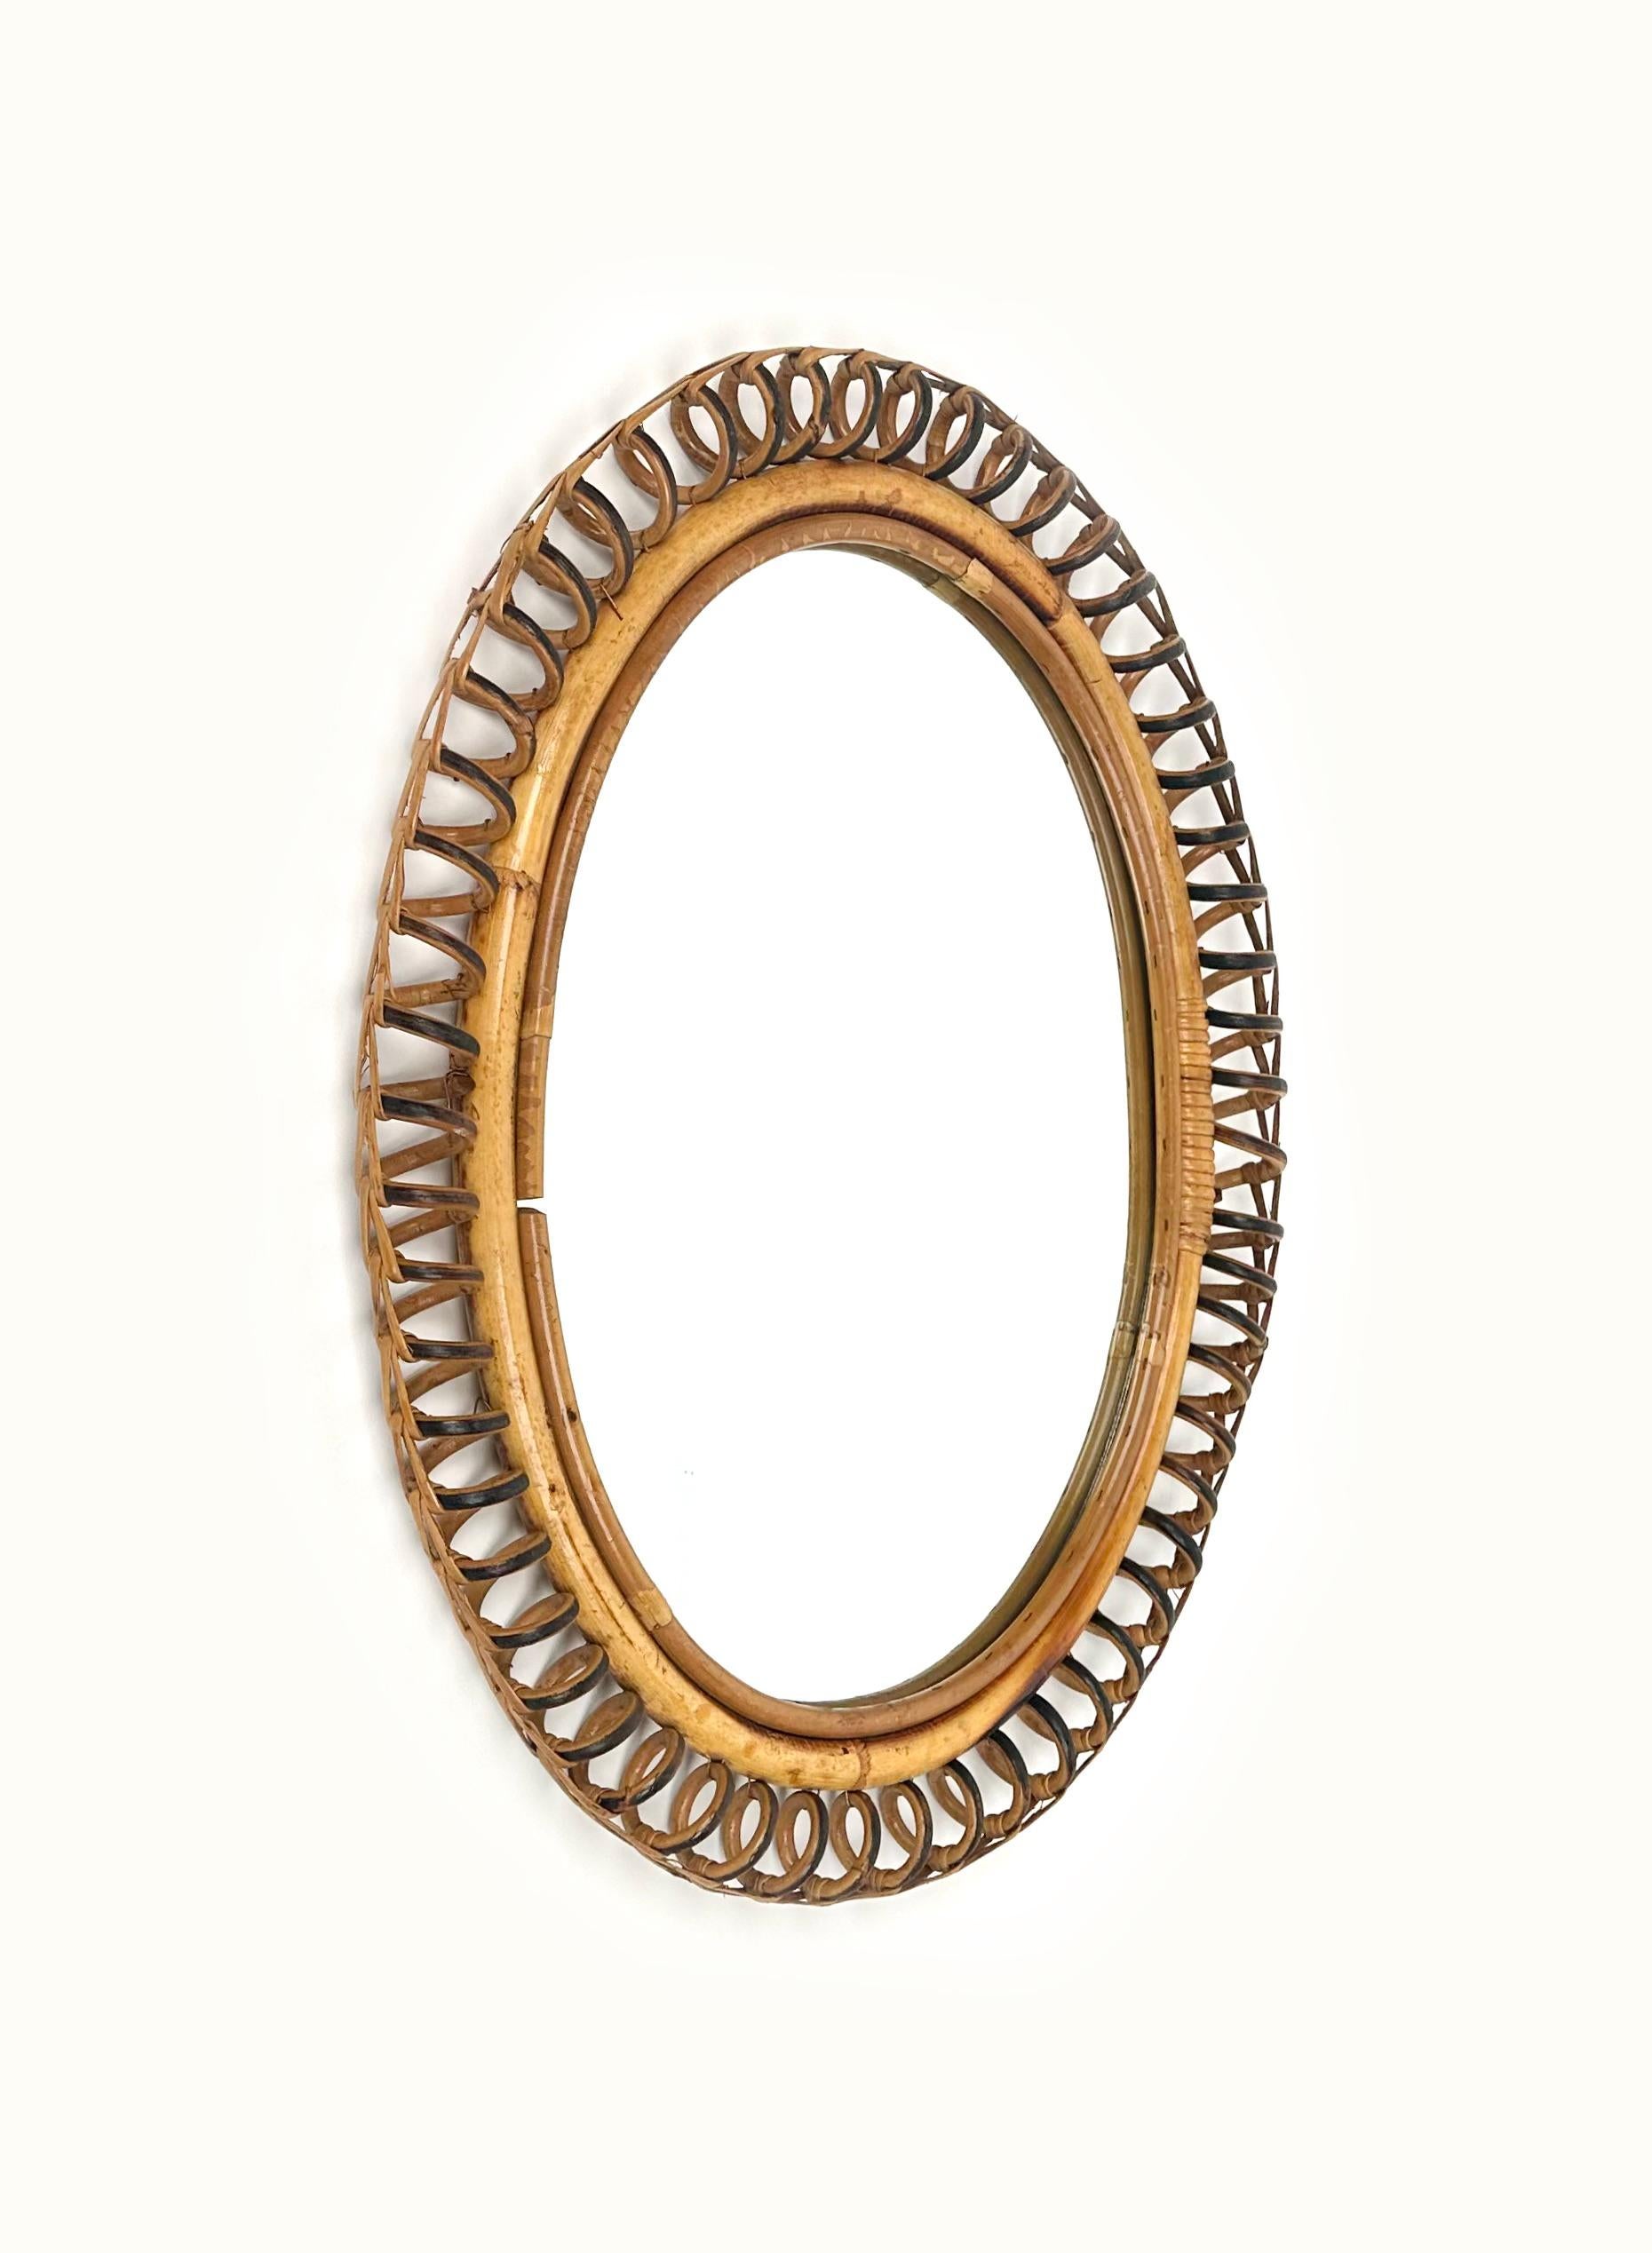 Mid century beautiful oval wall mirror in bamboo and rattan in the style of Italian design Franco Albini.

Made in Italy in the 1960s.